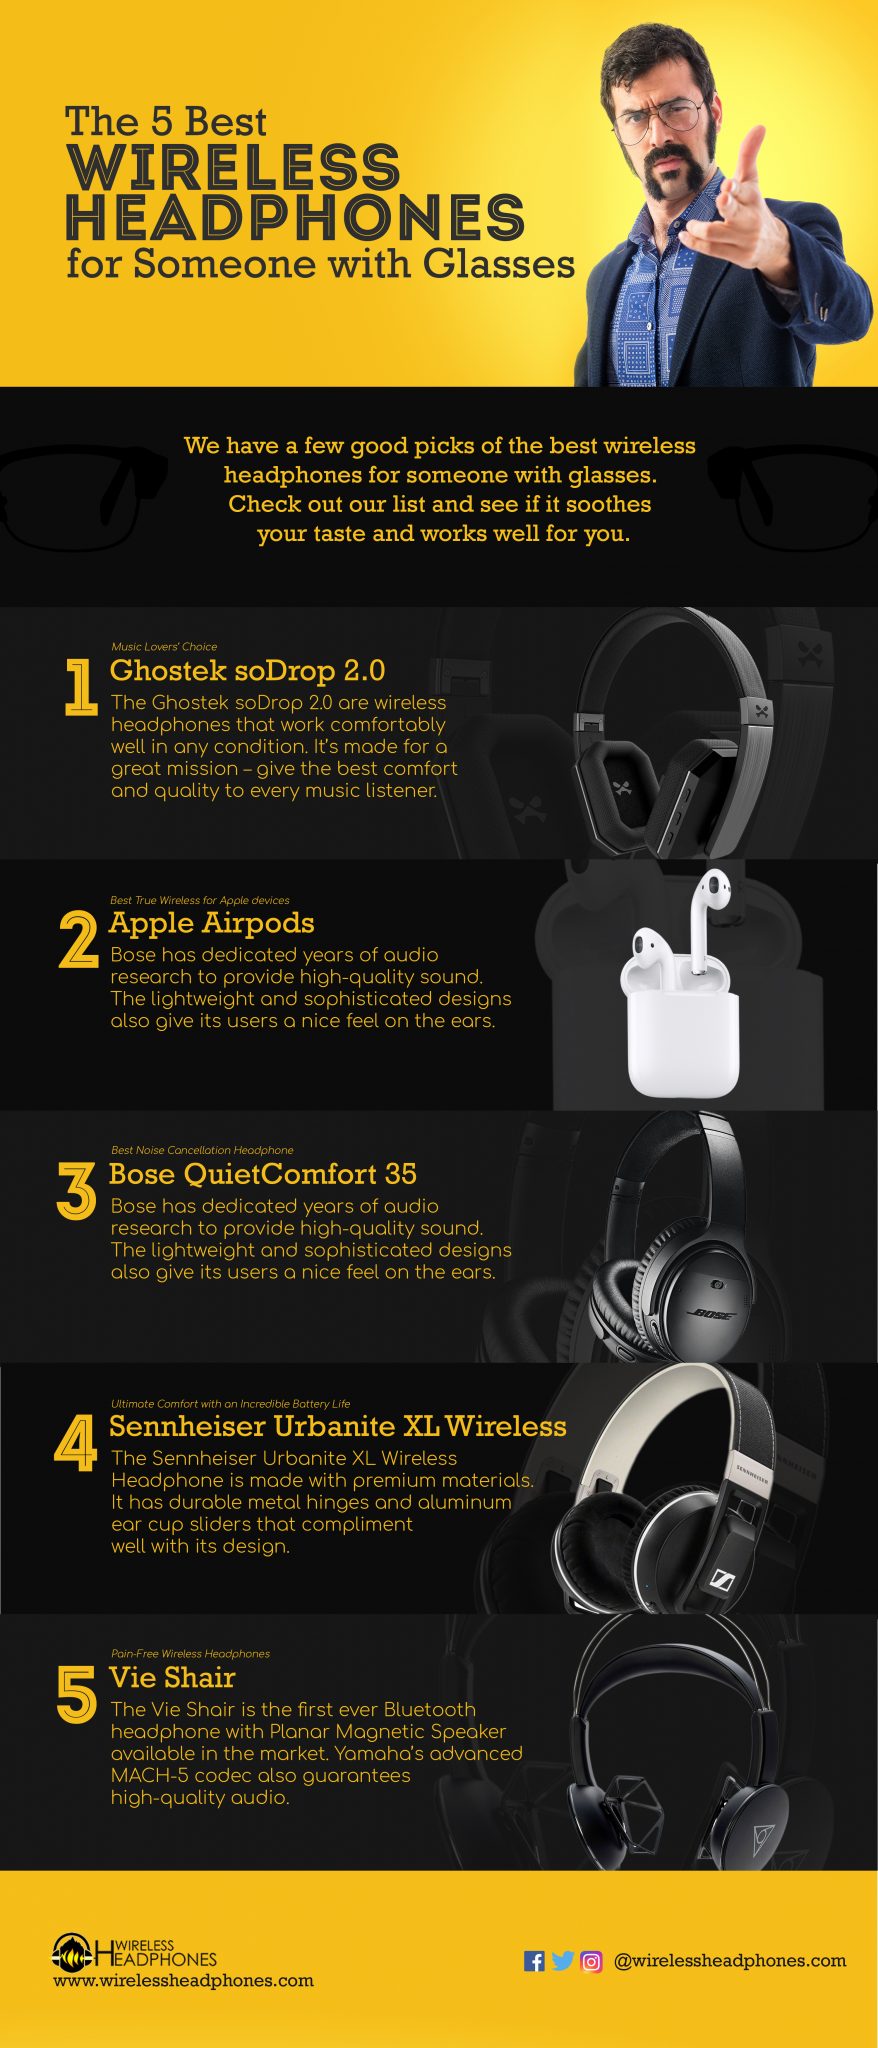 The 5 Best Wiresless Headphones for Someone with Glasses